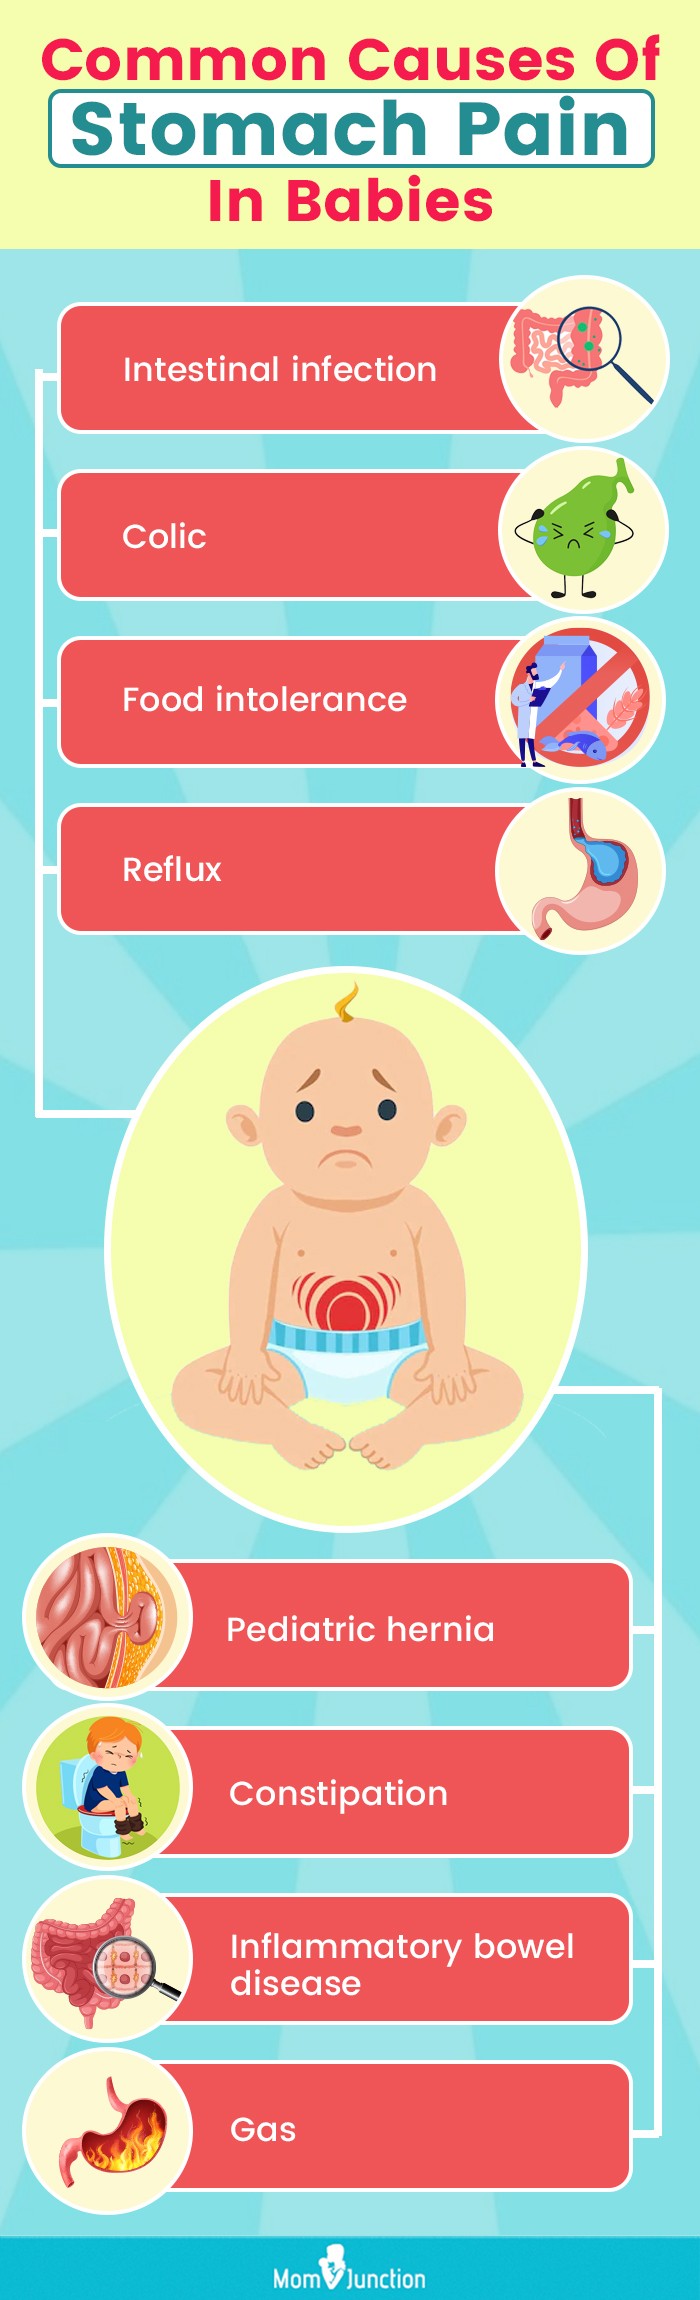 common causes of stomach pain in babies (infographic)